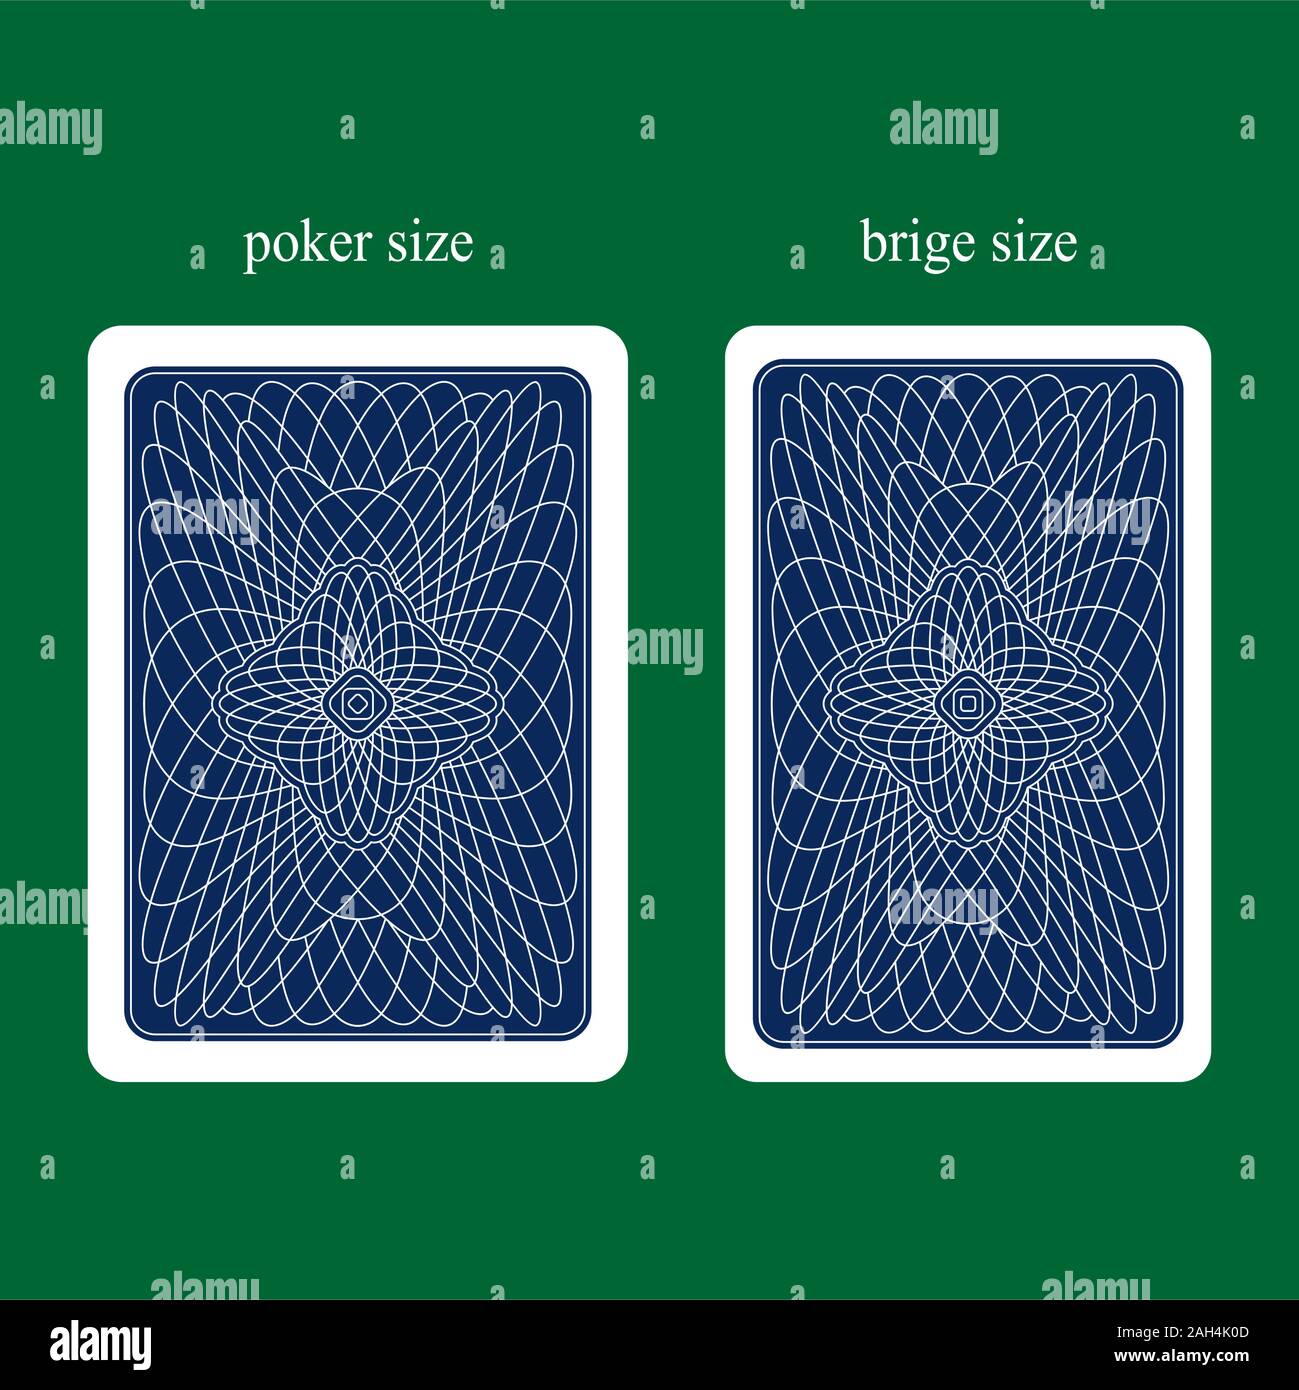 Reverse Side of the Playing Card. Two Options are the Poker Size & the Bridge Size. Stock Vector